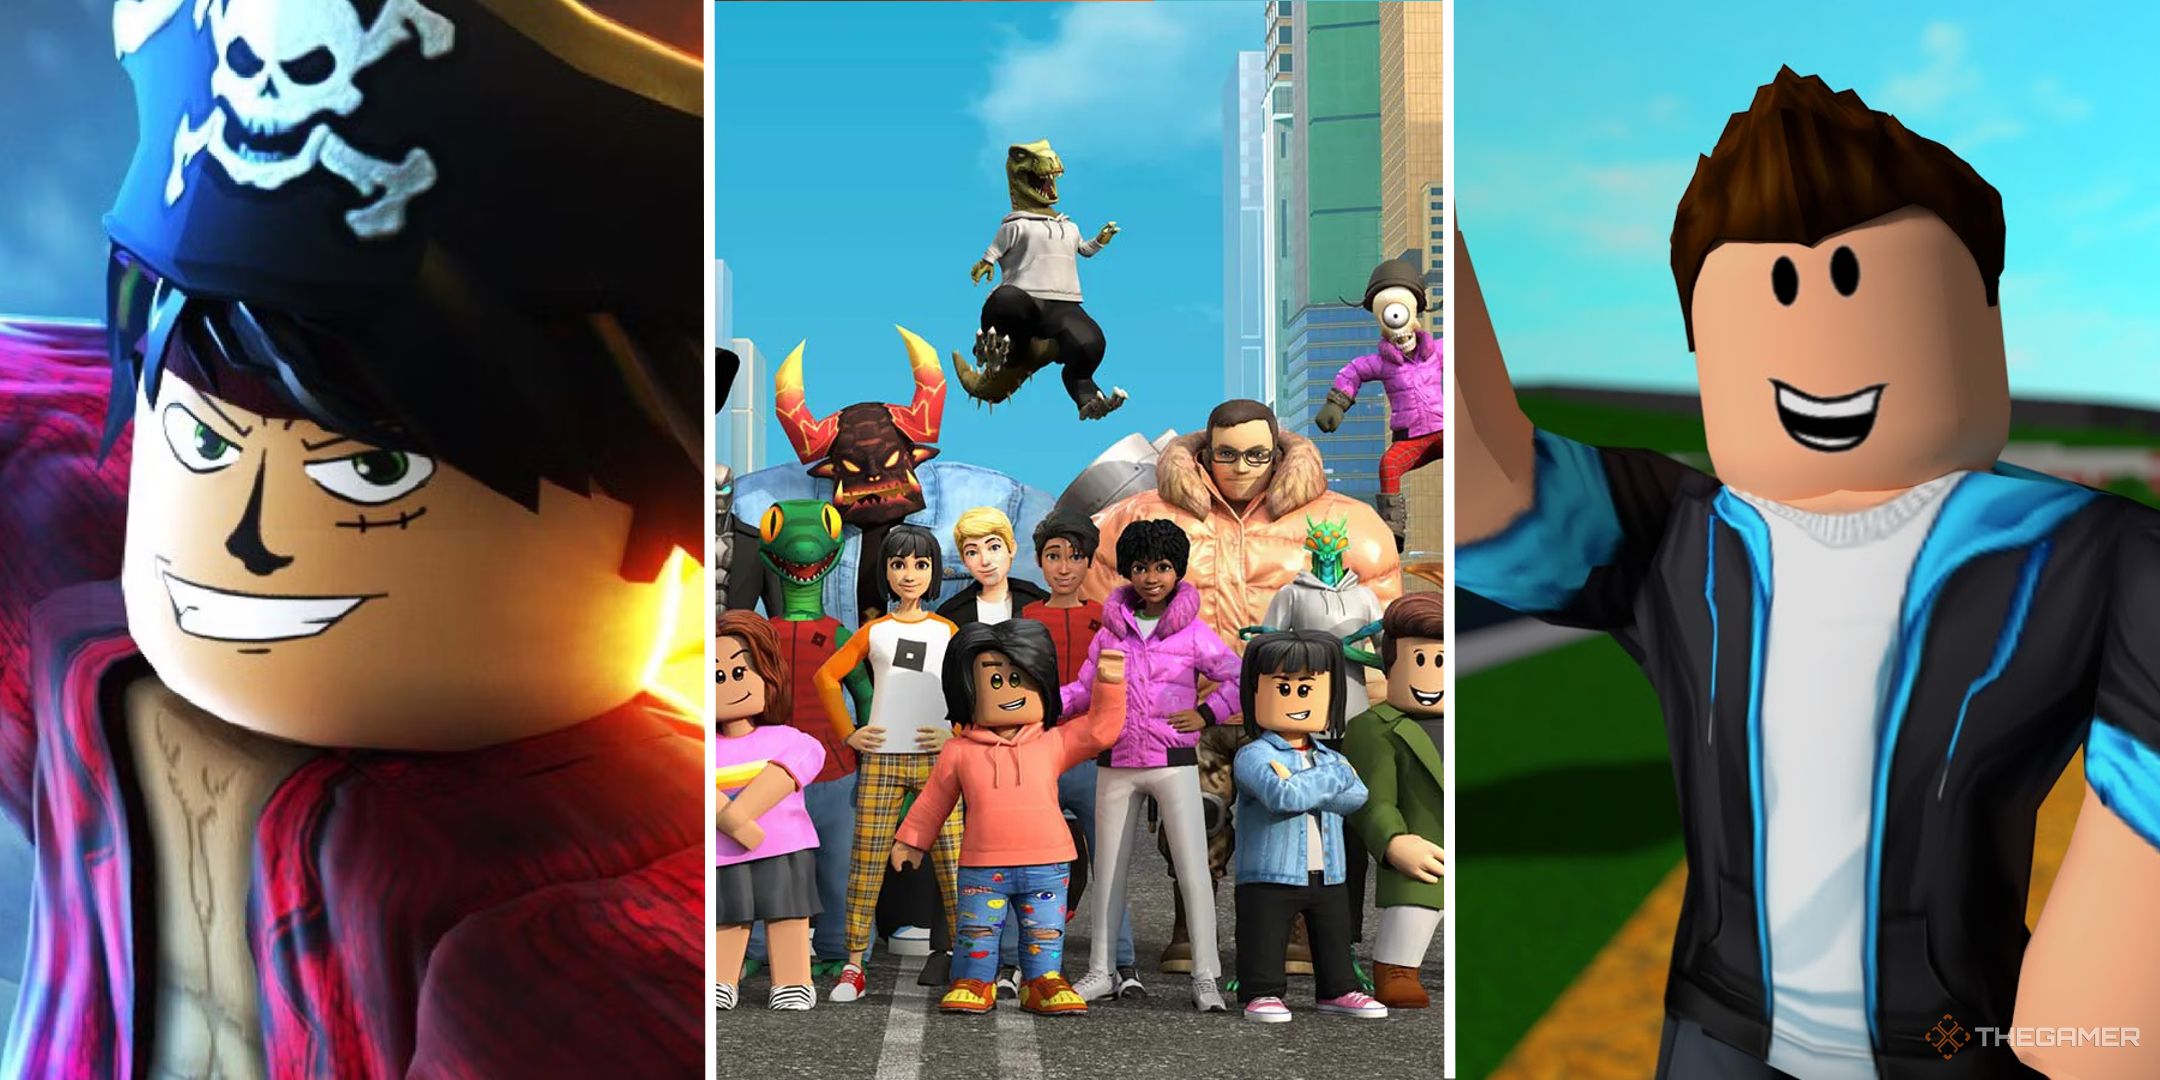 roblox split image with blox fruit and bloxburg, with roblox promotional art in center of screen